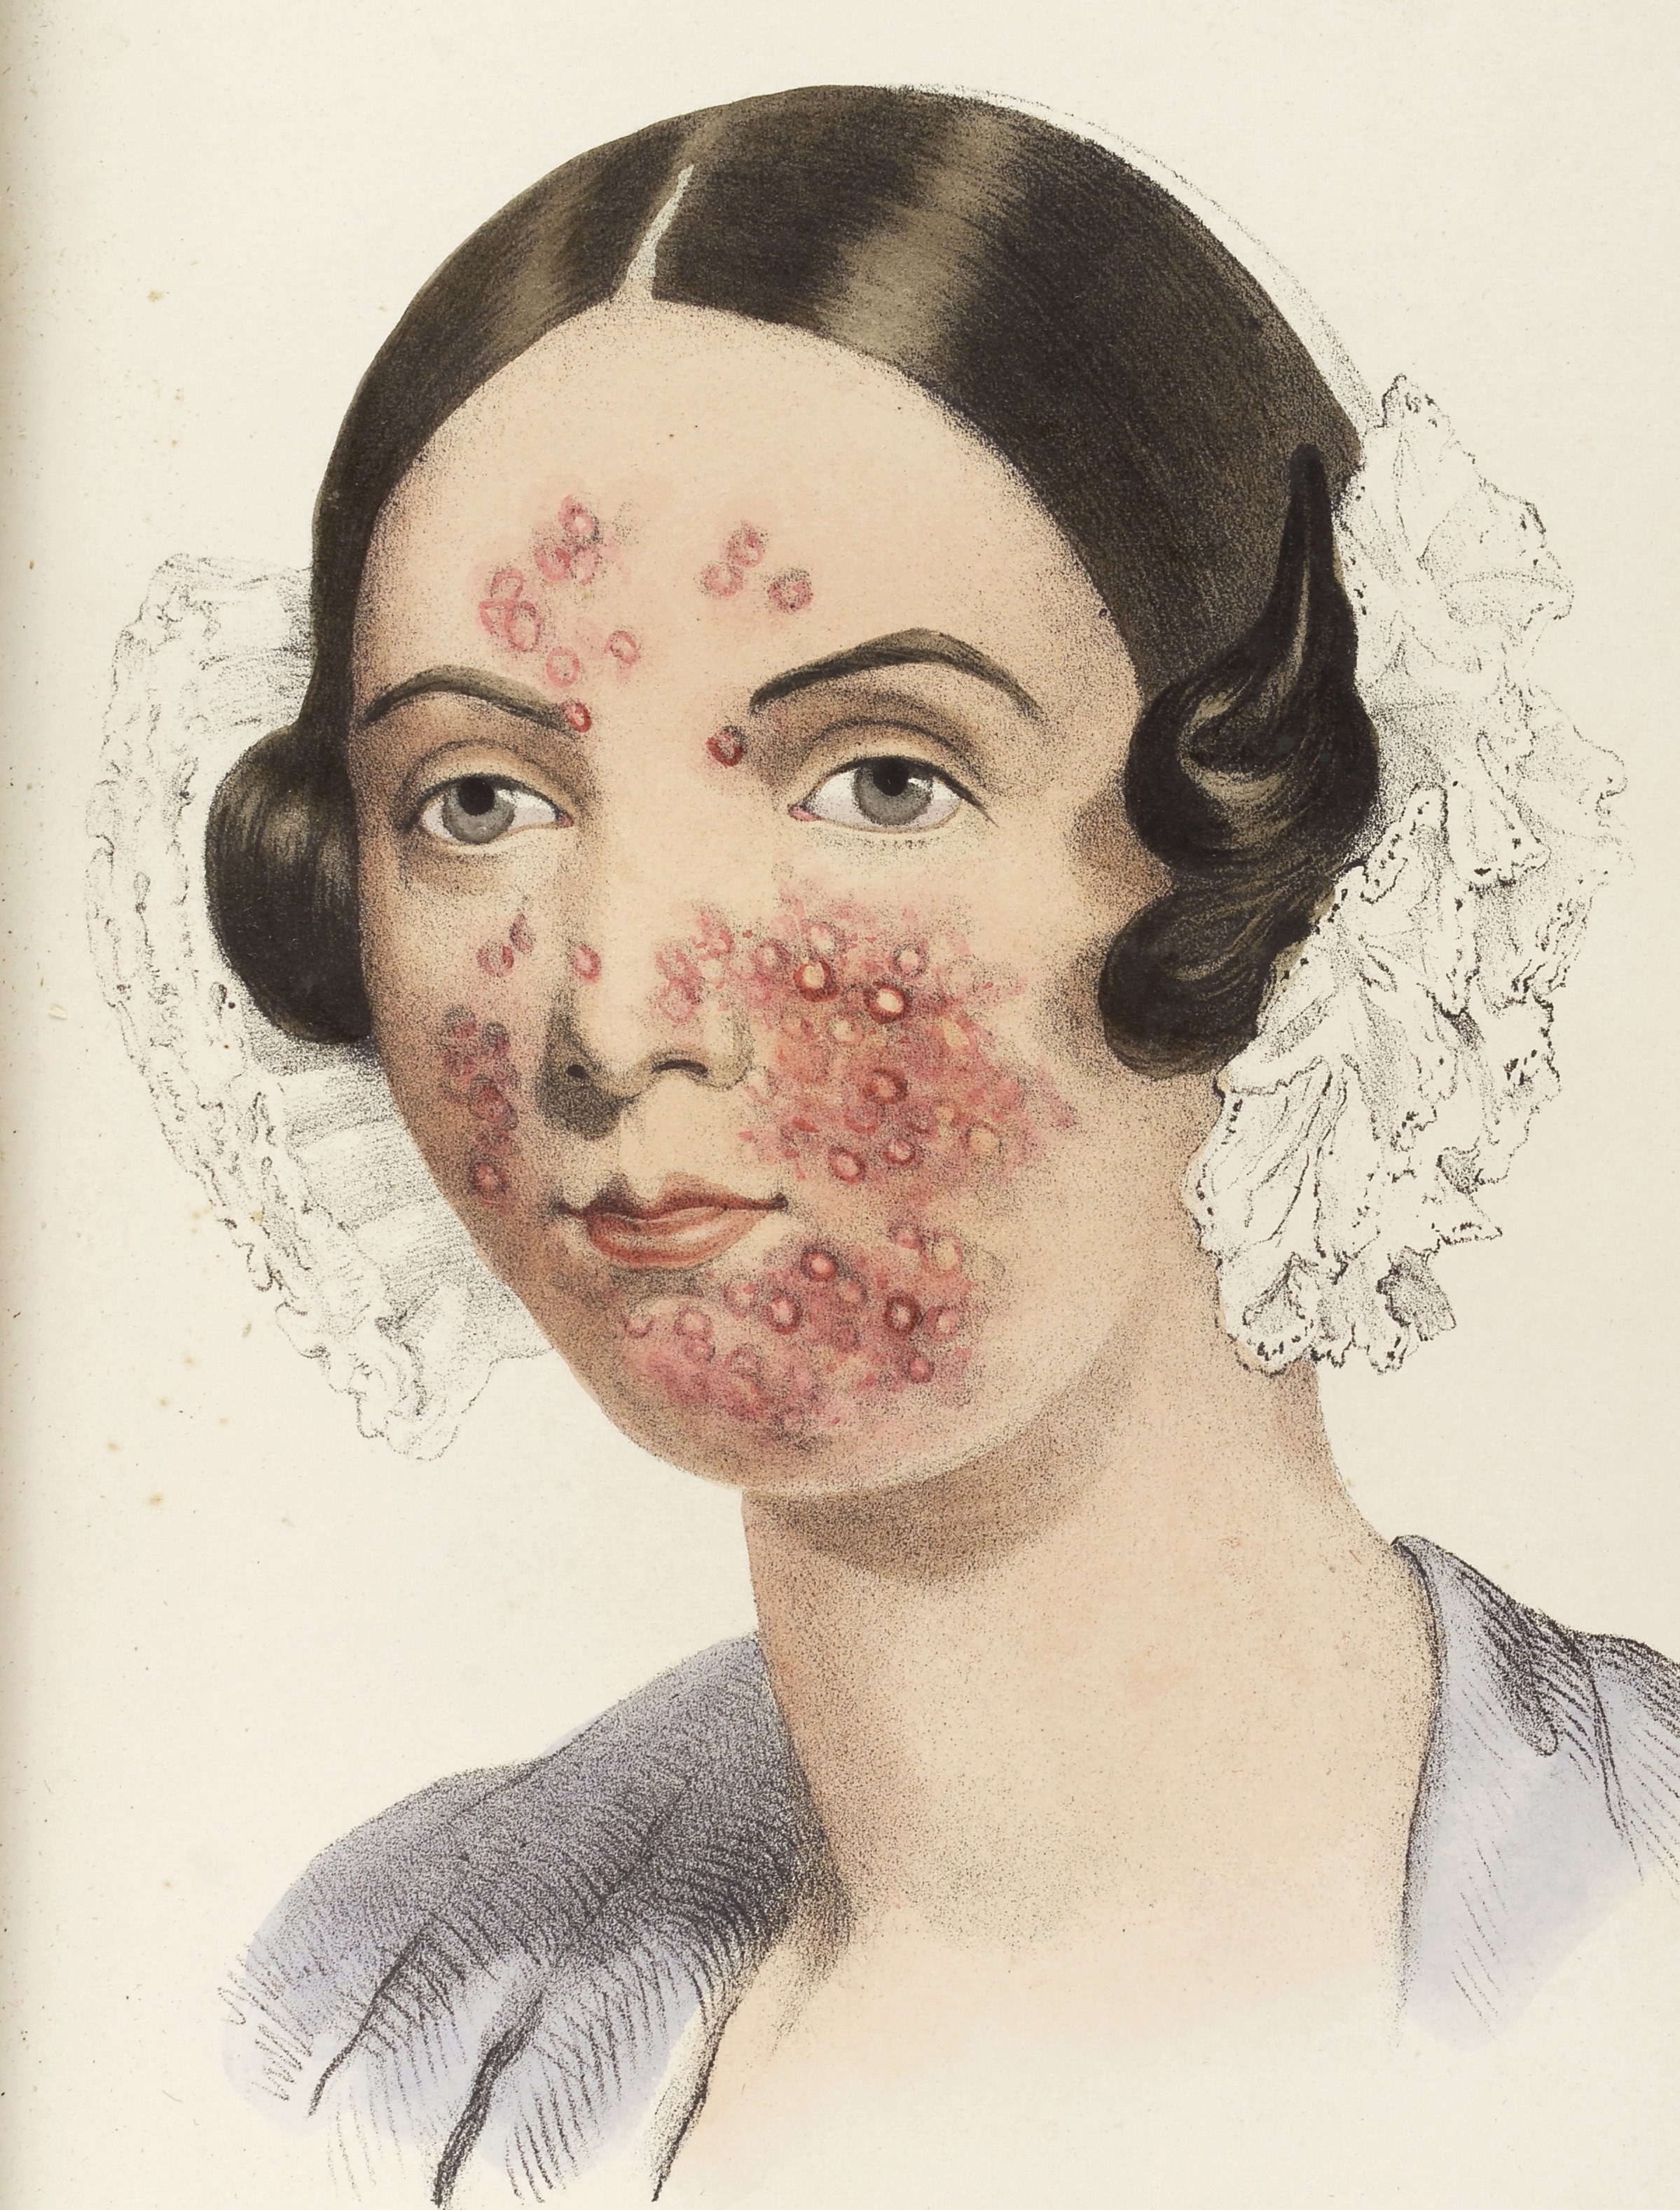 L0037455 Illustration of a woman with acne on her face